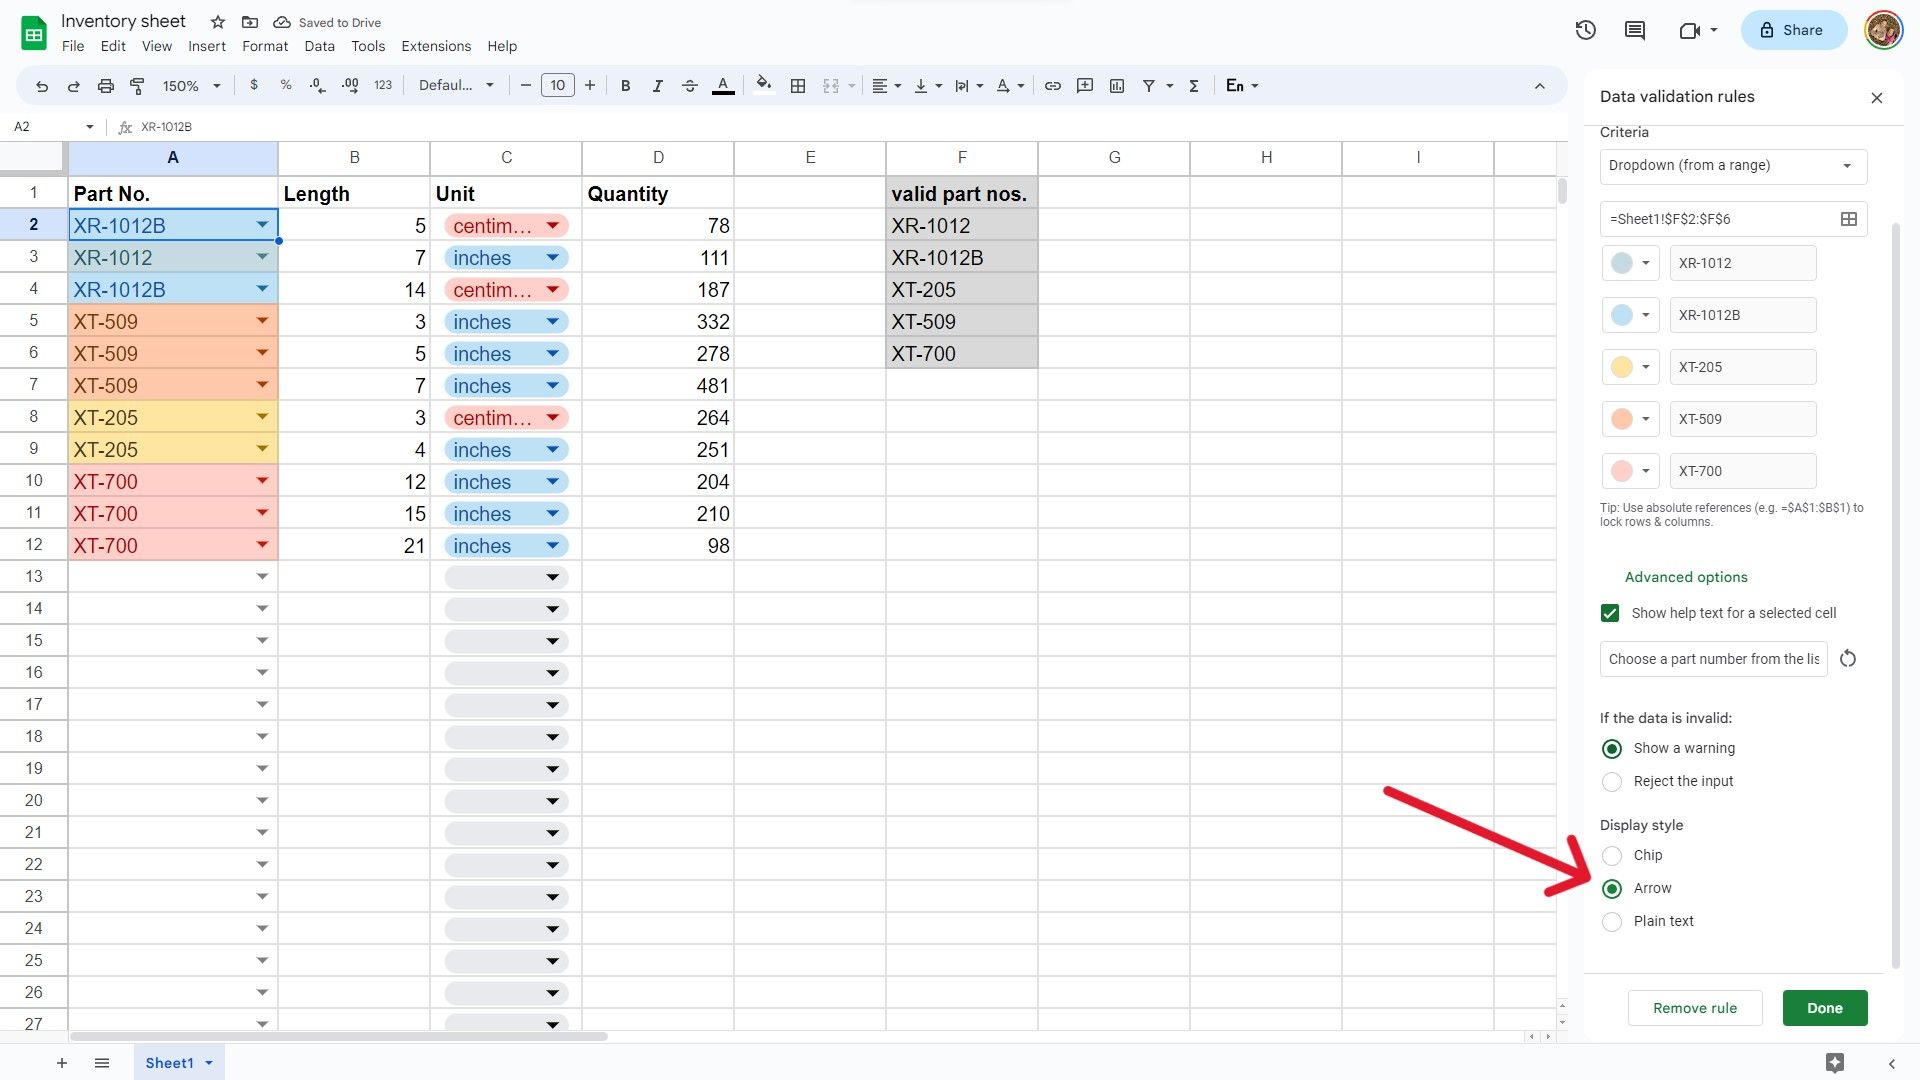 A screenshot of a Google Sheets document showing dropdowns style.